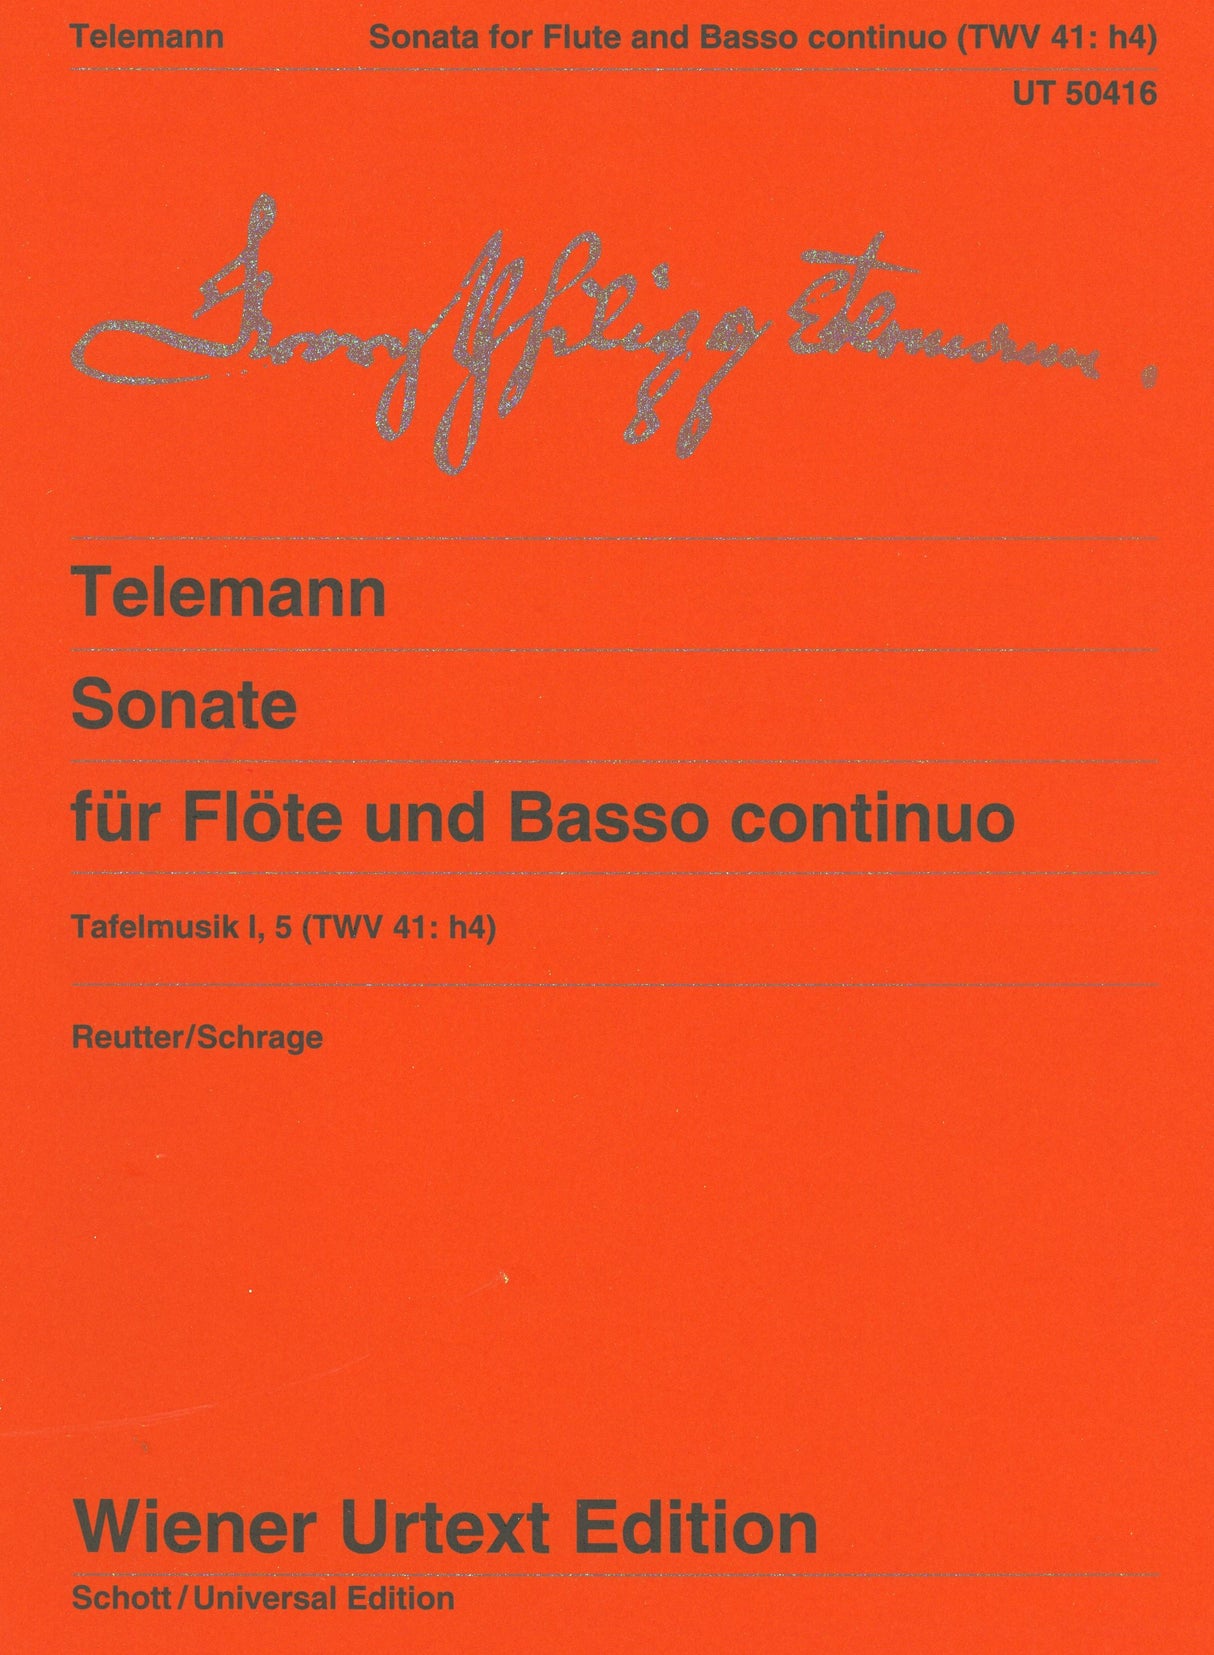 Telemann: Sonata for Flute and Basso continuo, TWV 41:h4